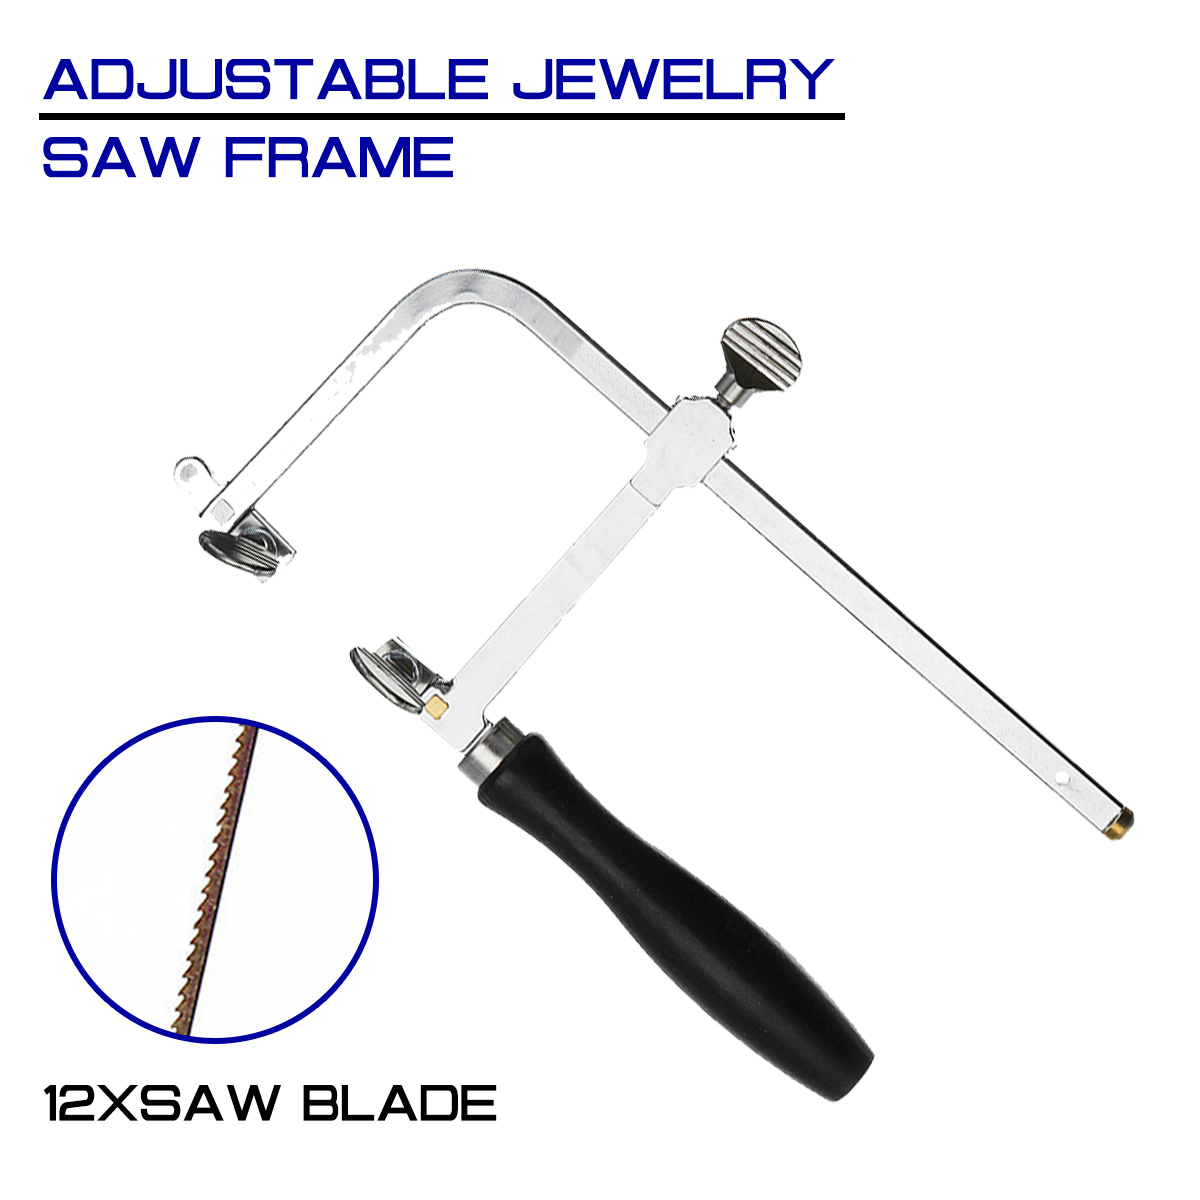 12Pcs Saw Blade + Adjustable Jewelry Saw Frame 18.5x8.7cm For Jewelry Making Woodworking With Wood Handle Repair Craft Tool